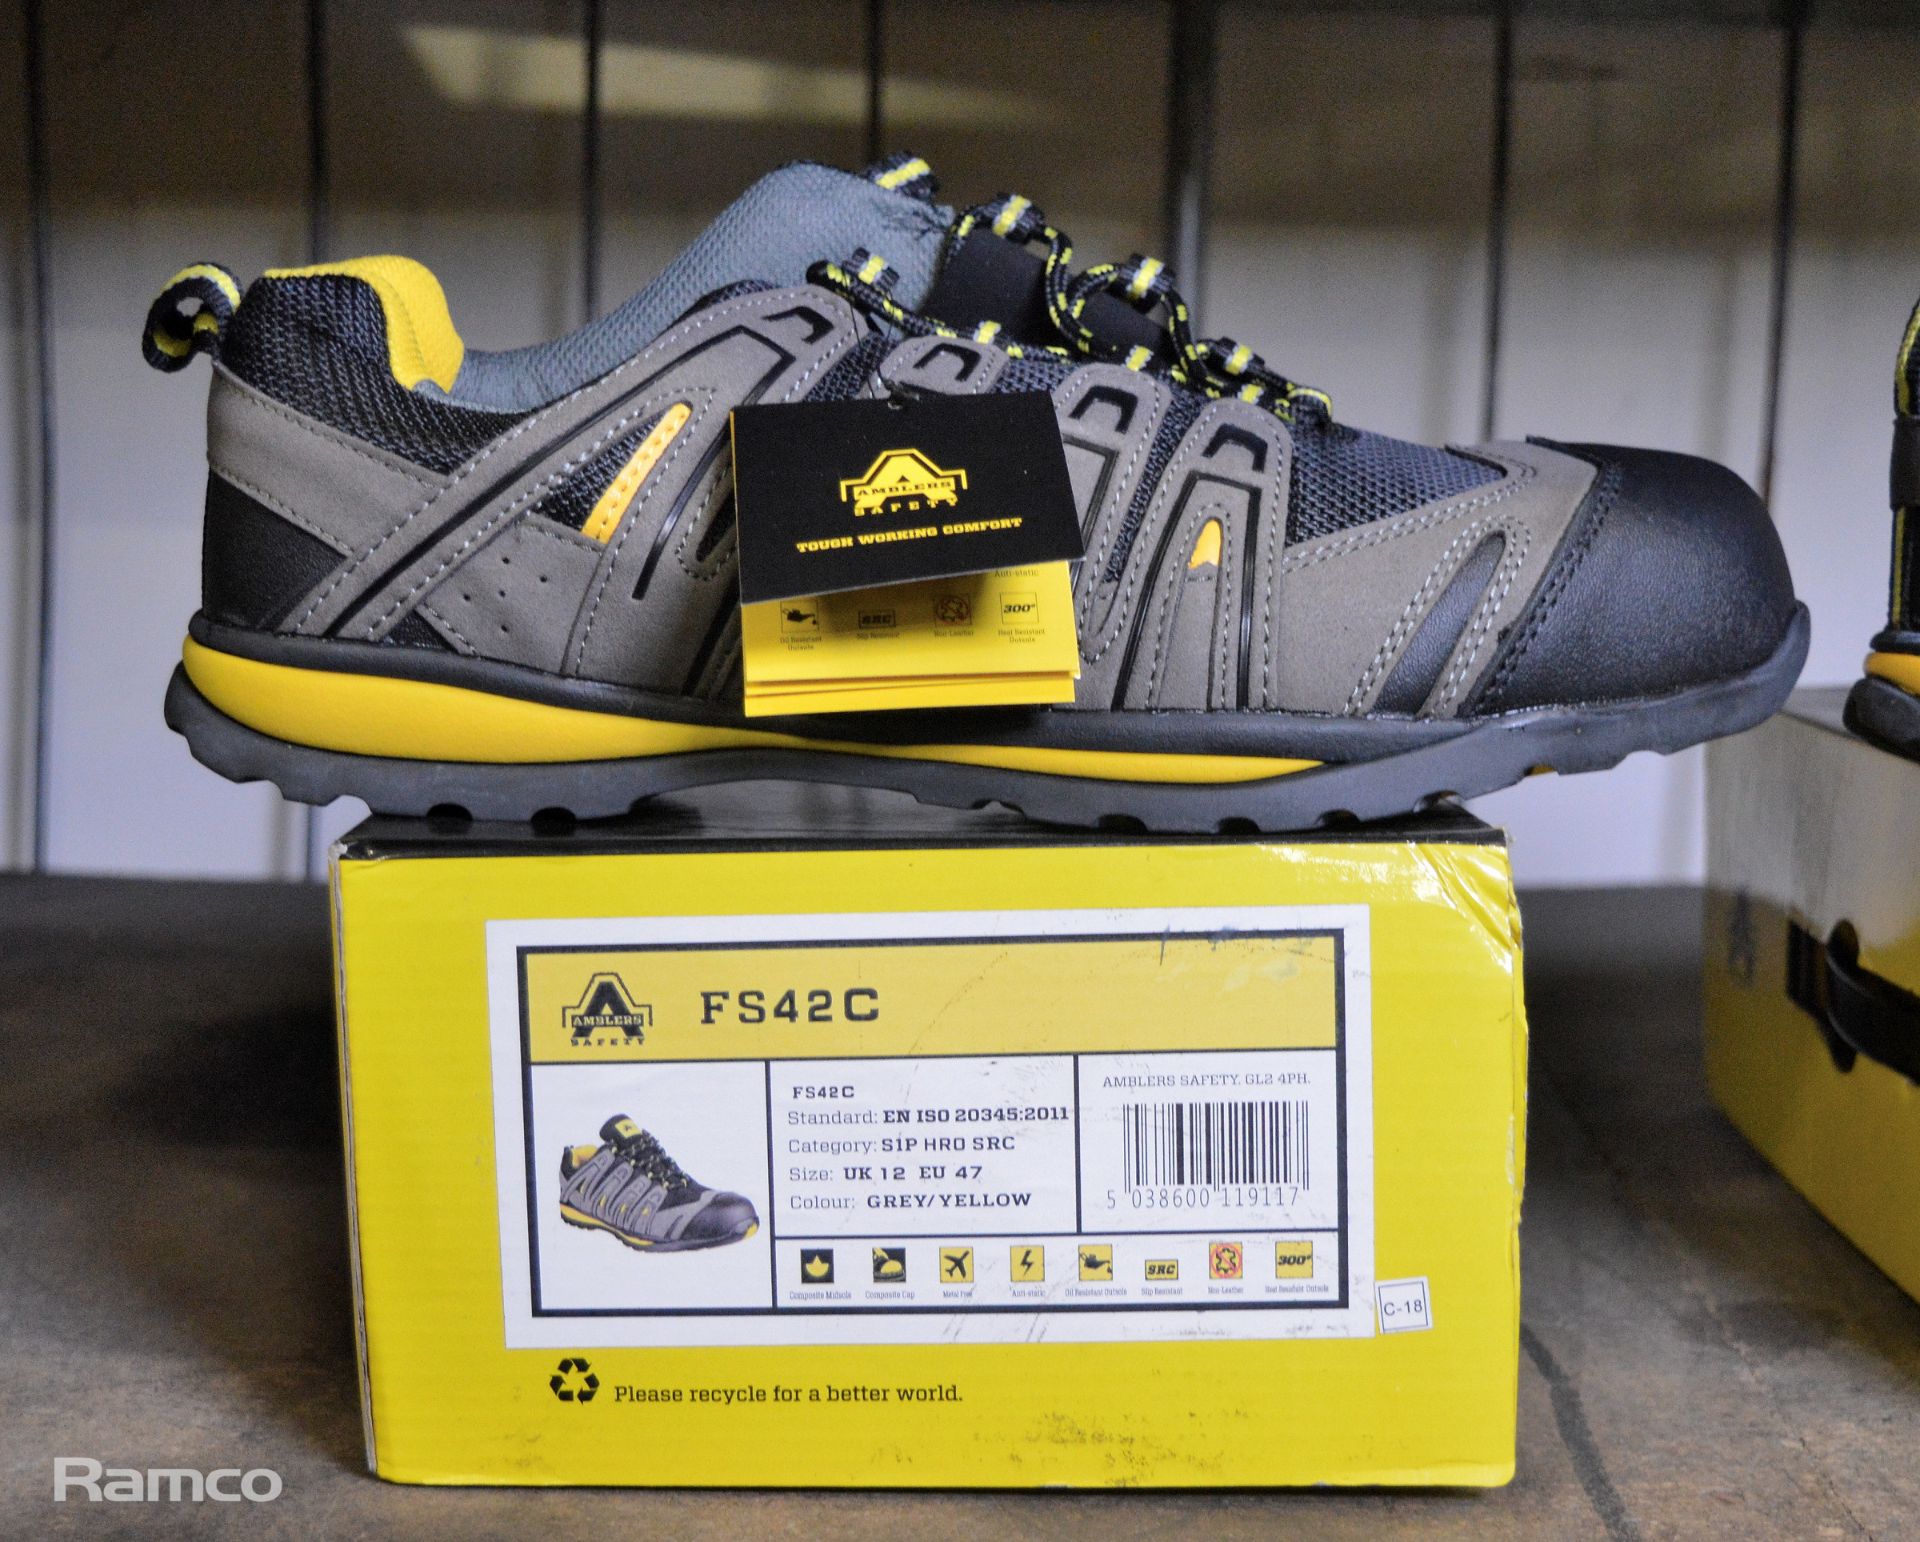 2x Pairs of Ambler FS42C safety shoes - 1x size 6 & 1x size 12 - Image 2 of 3